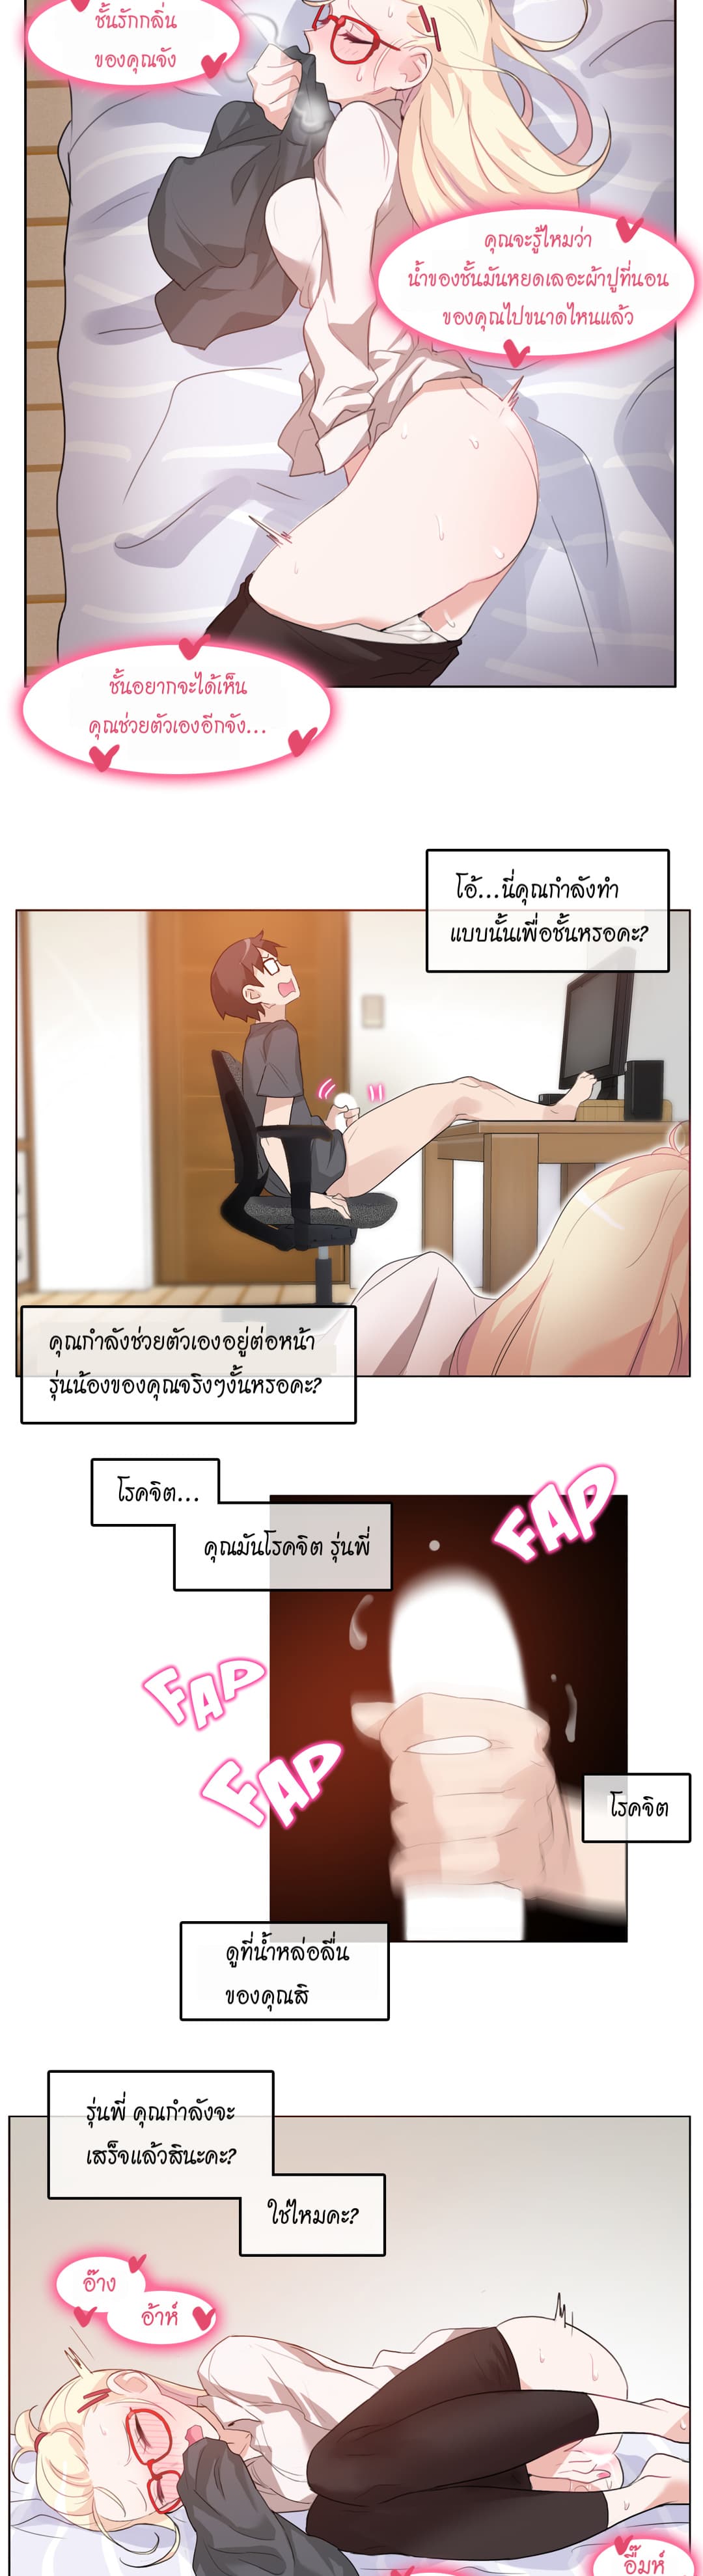 A Pervert’s Daily Life 8 (16)